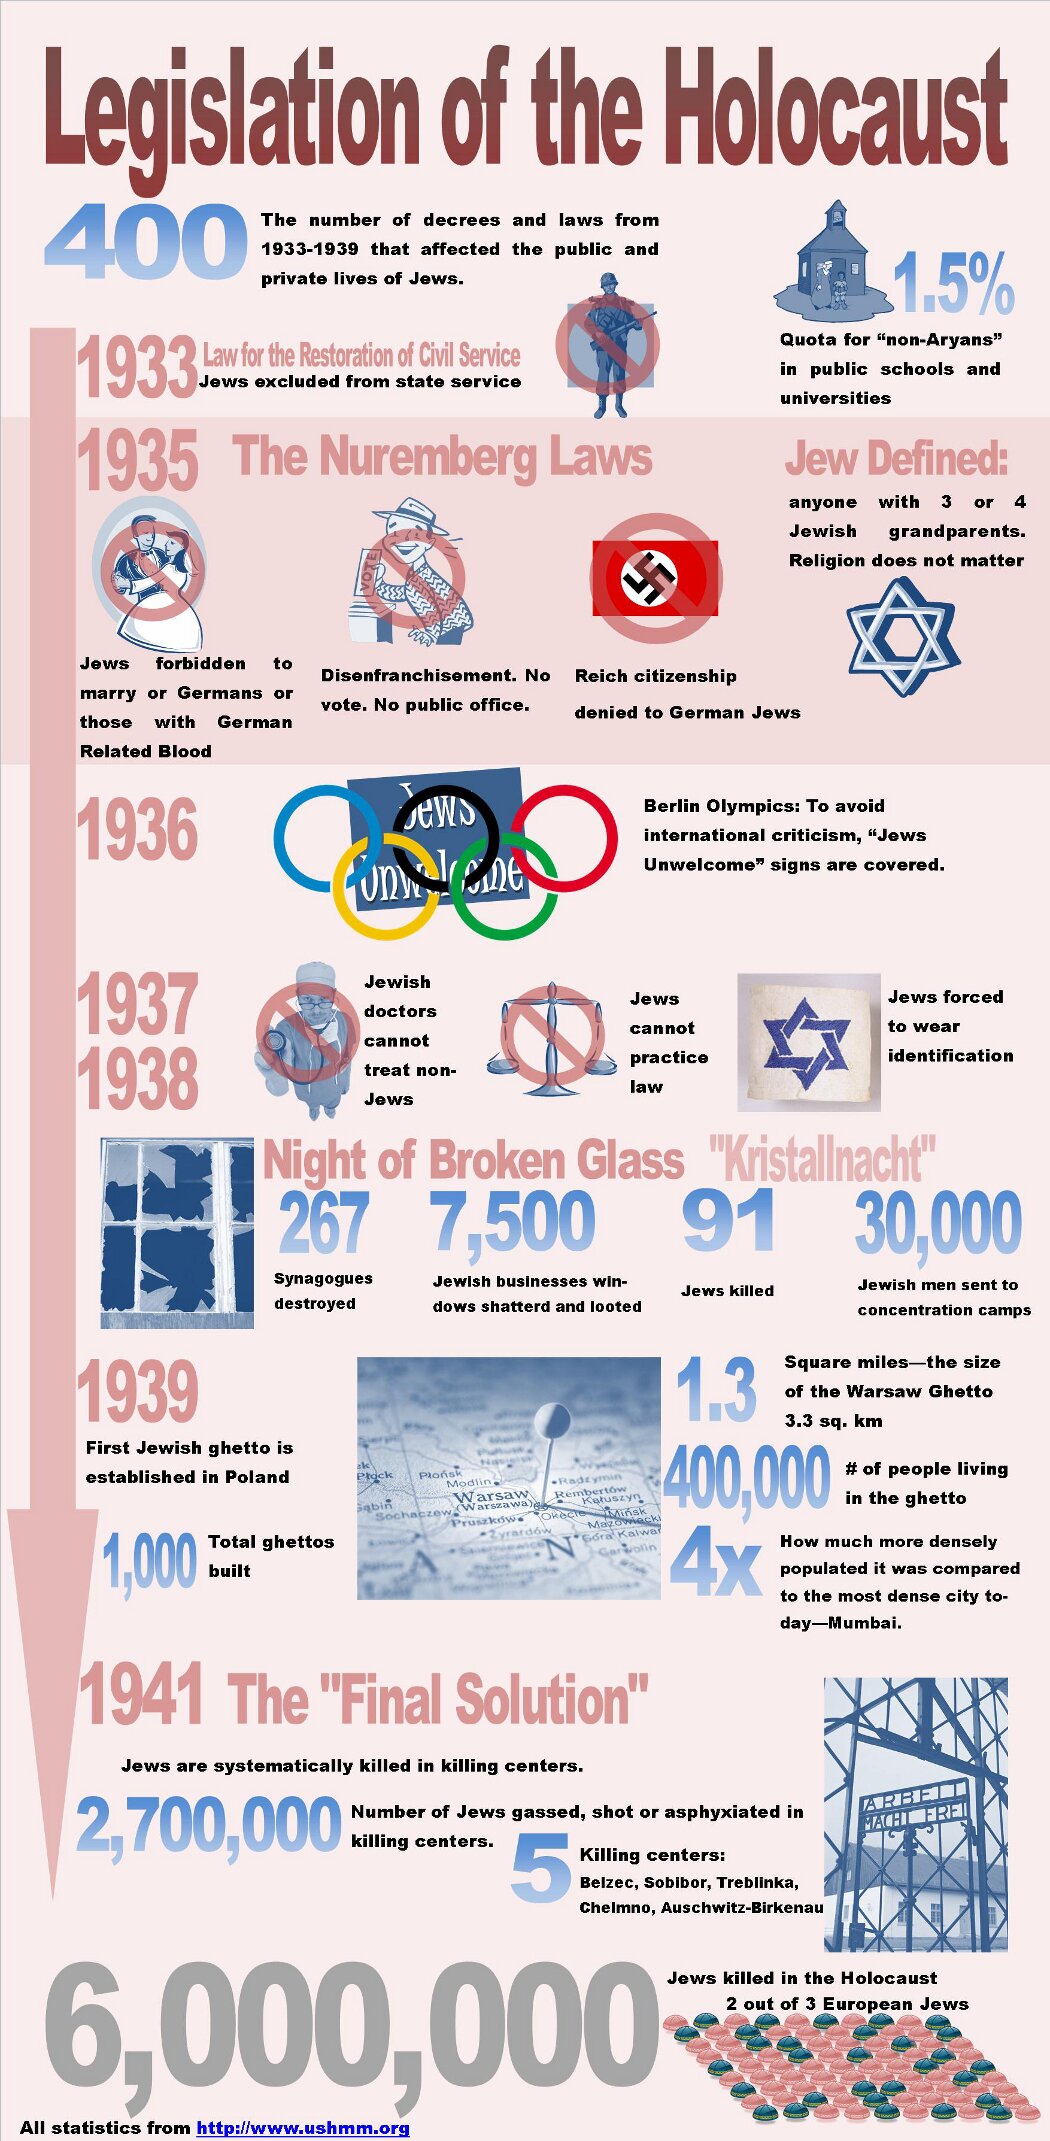 Holocaust Timeline and Facts